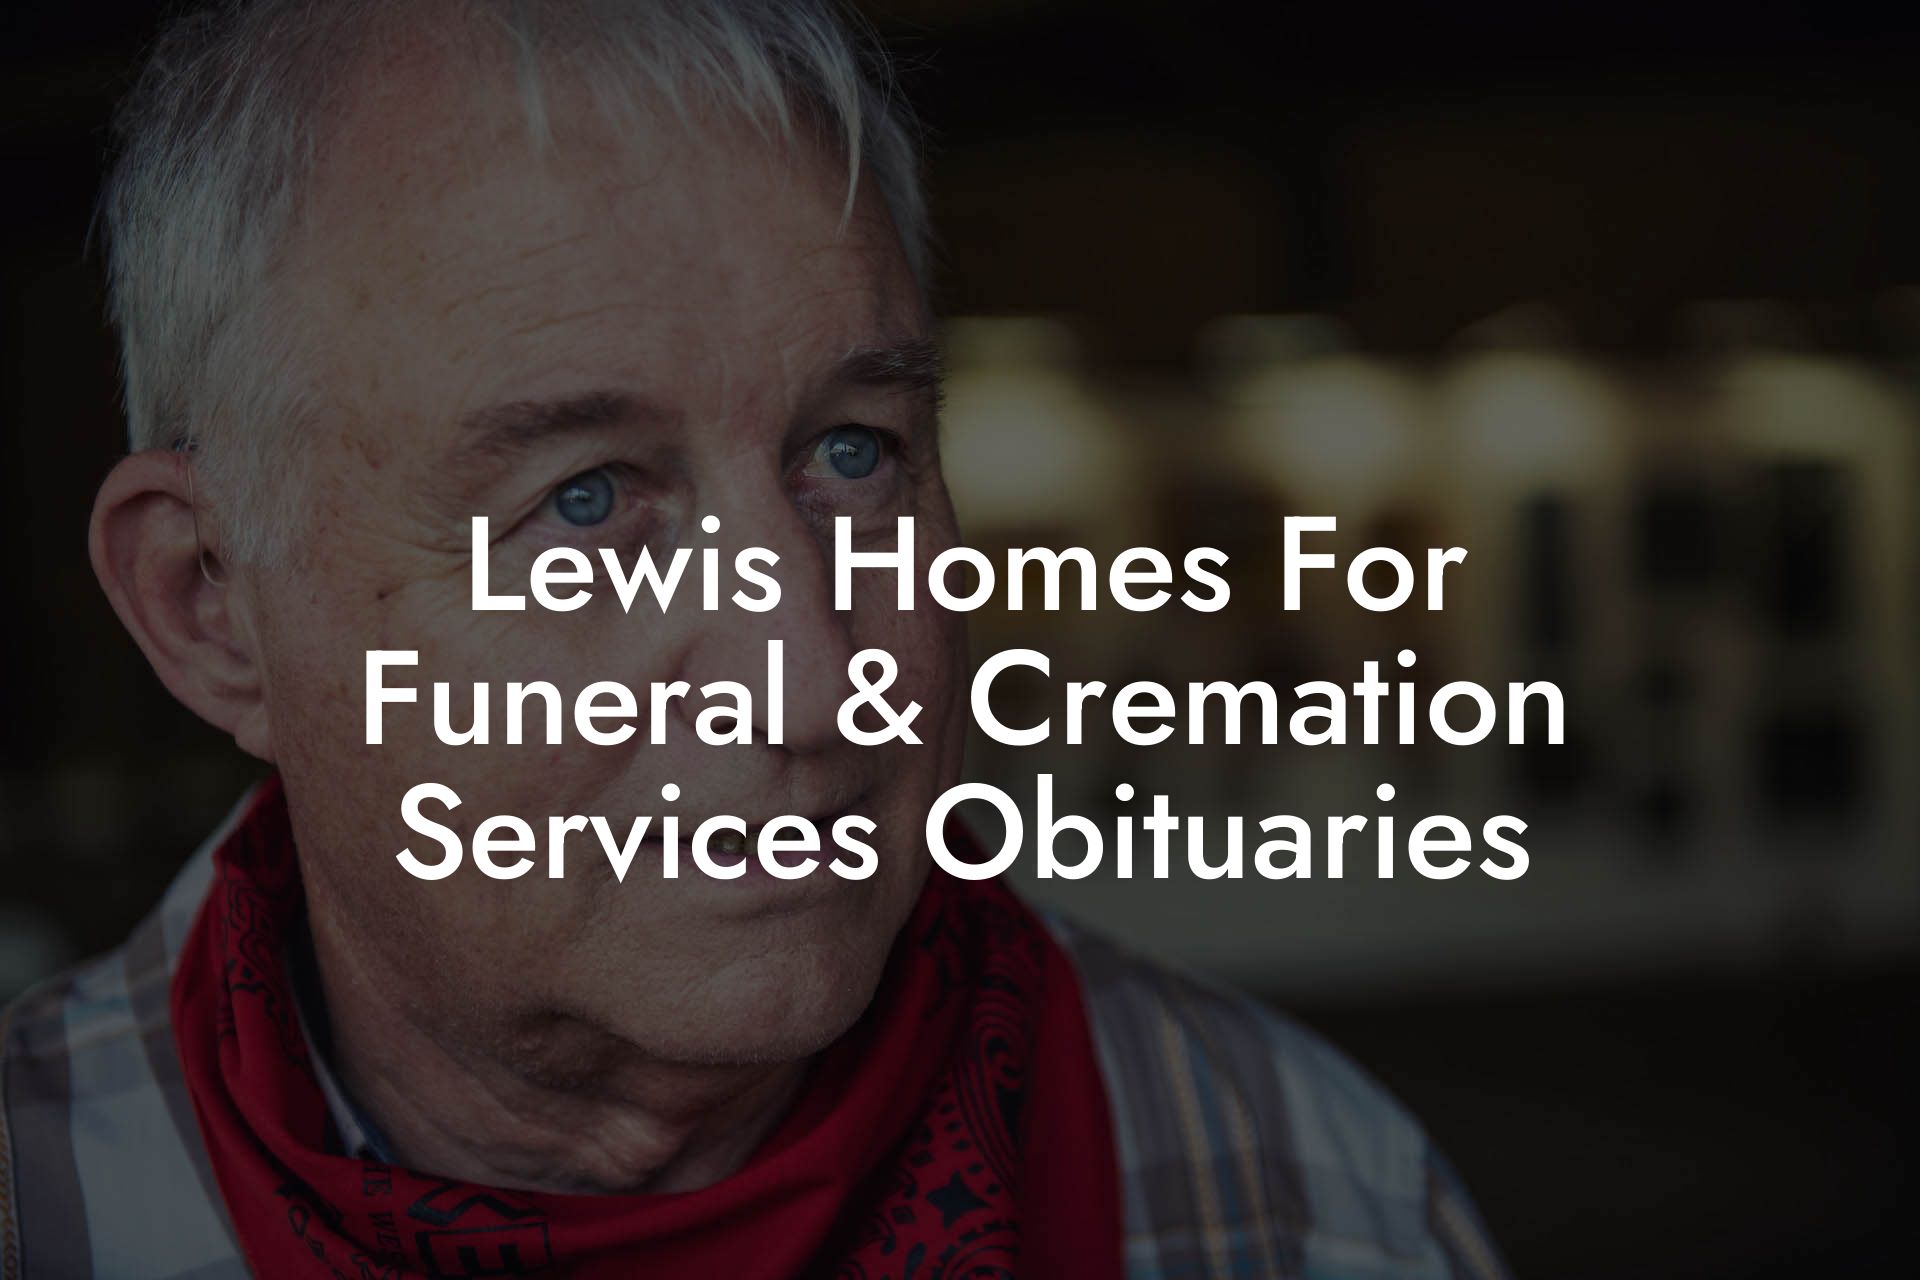 Lewis Homes For Funeral & Cremation Services Obituaries